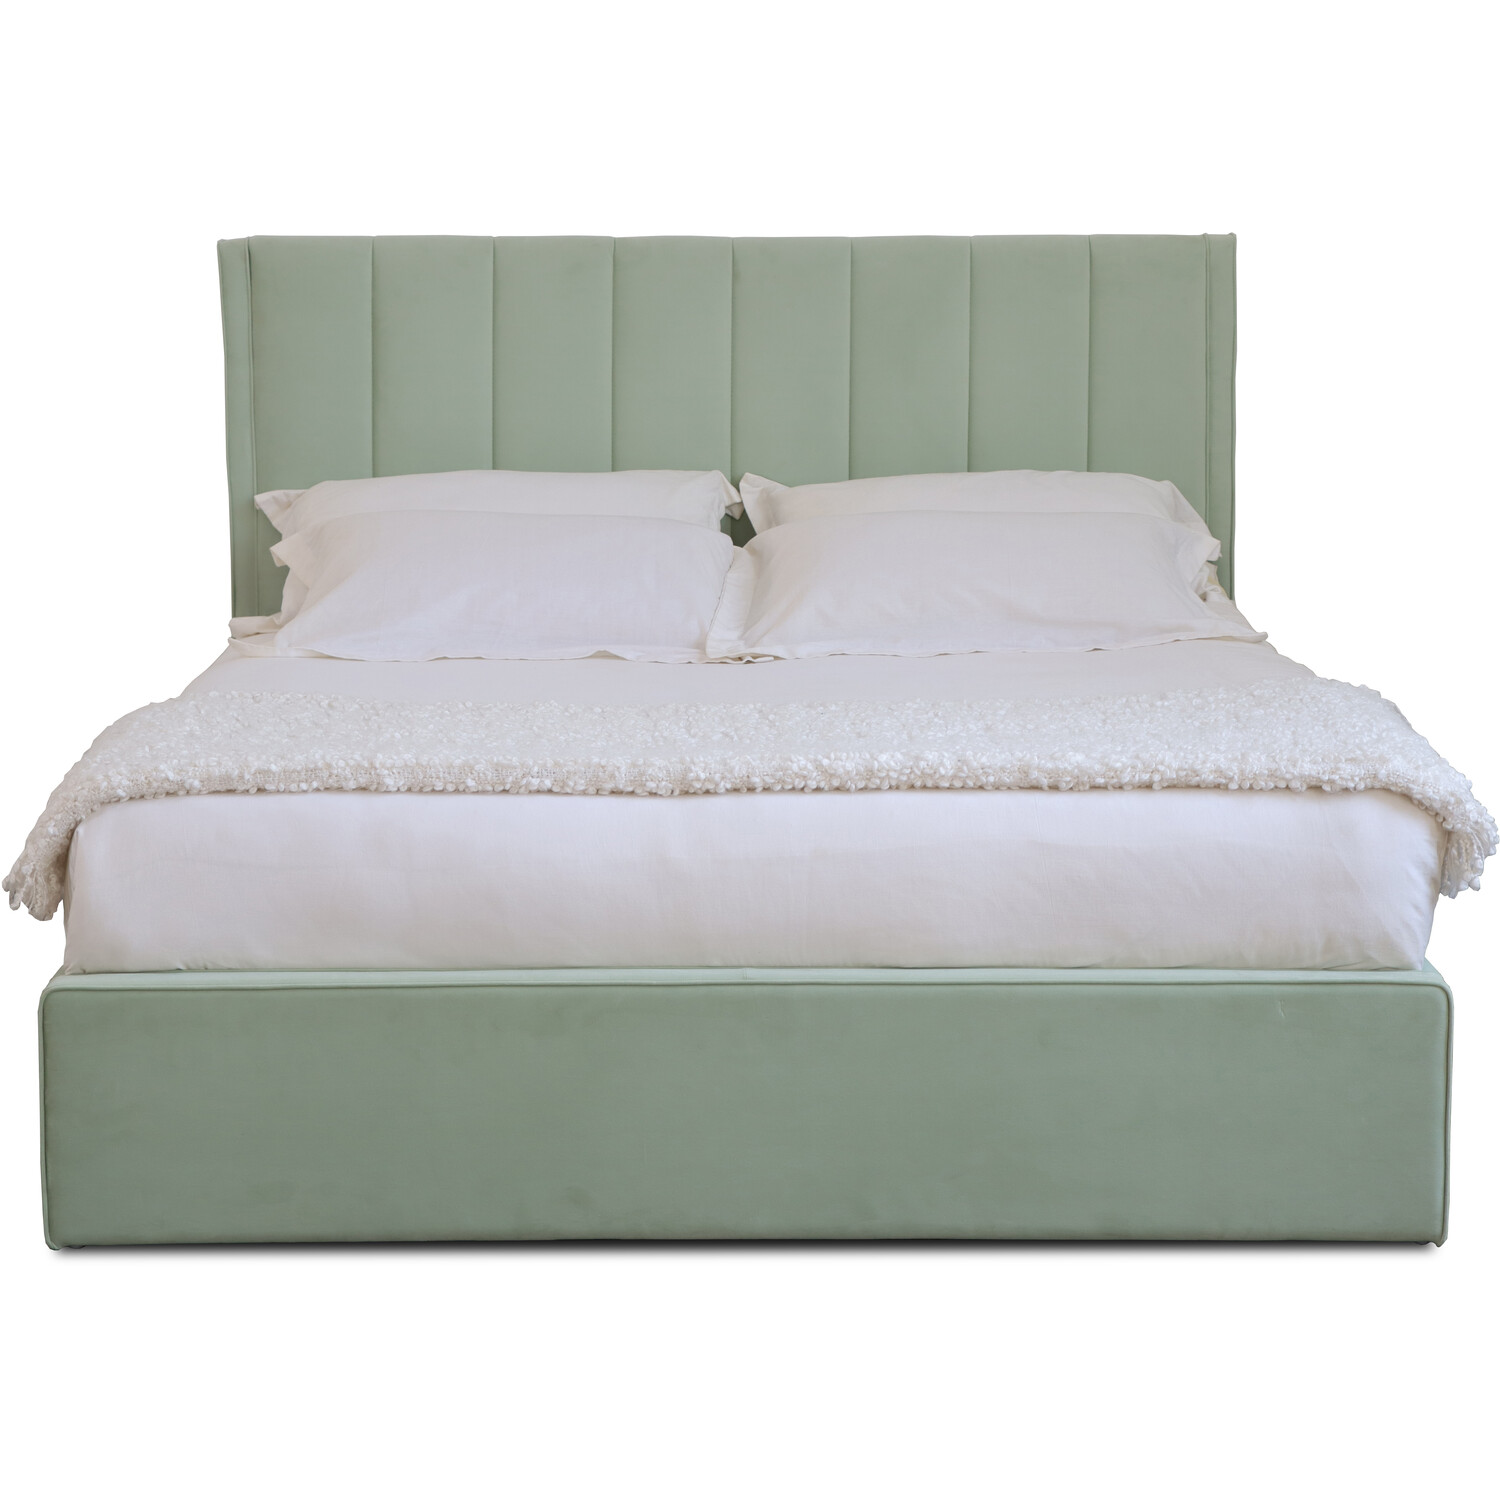 Willow Super King Size Mint Ottoman Bed Image 5